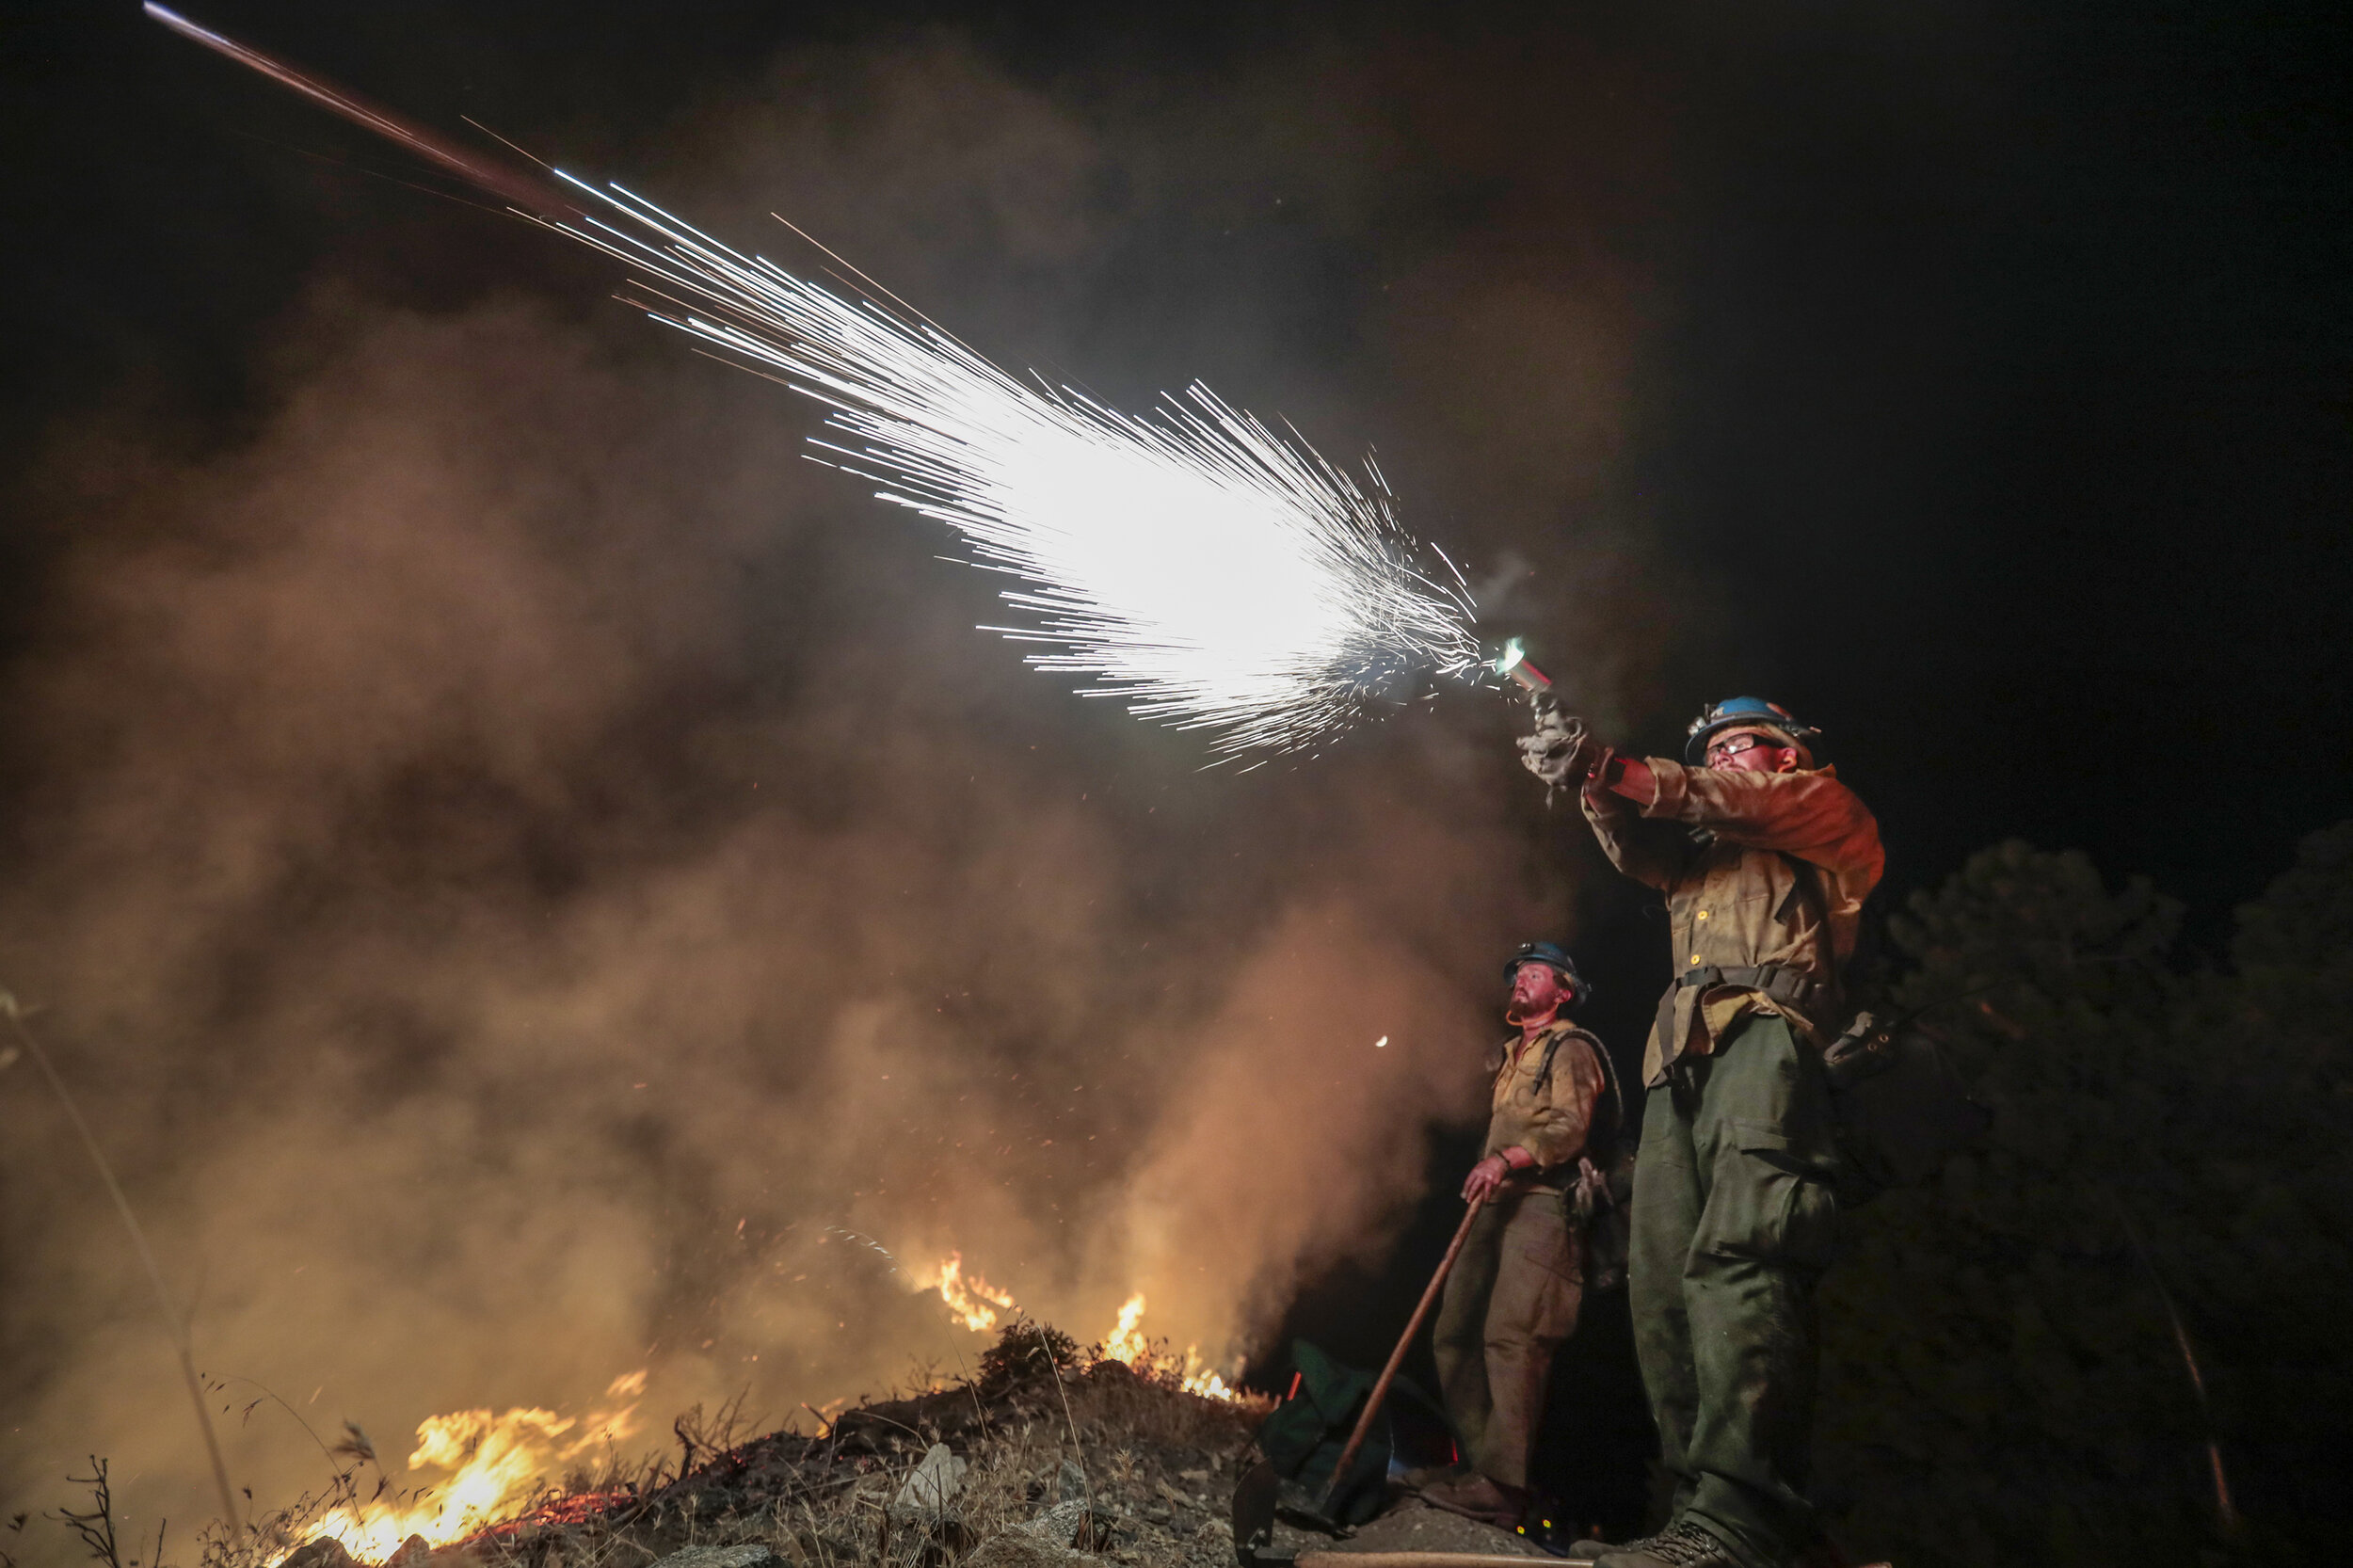  Blue Ridge, Arizona hotshot firefighter Keith Lemcke shoots a flare into dry brush as Kurt Mattocks supervises during a burn out operation on the Bobcat Fire. It was reported that nearly 3400 fire personnel were deployed throughout the country at th